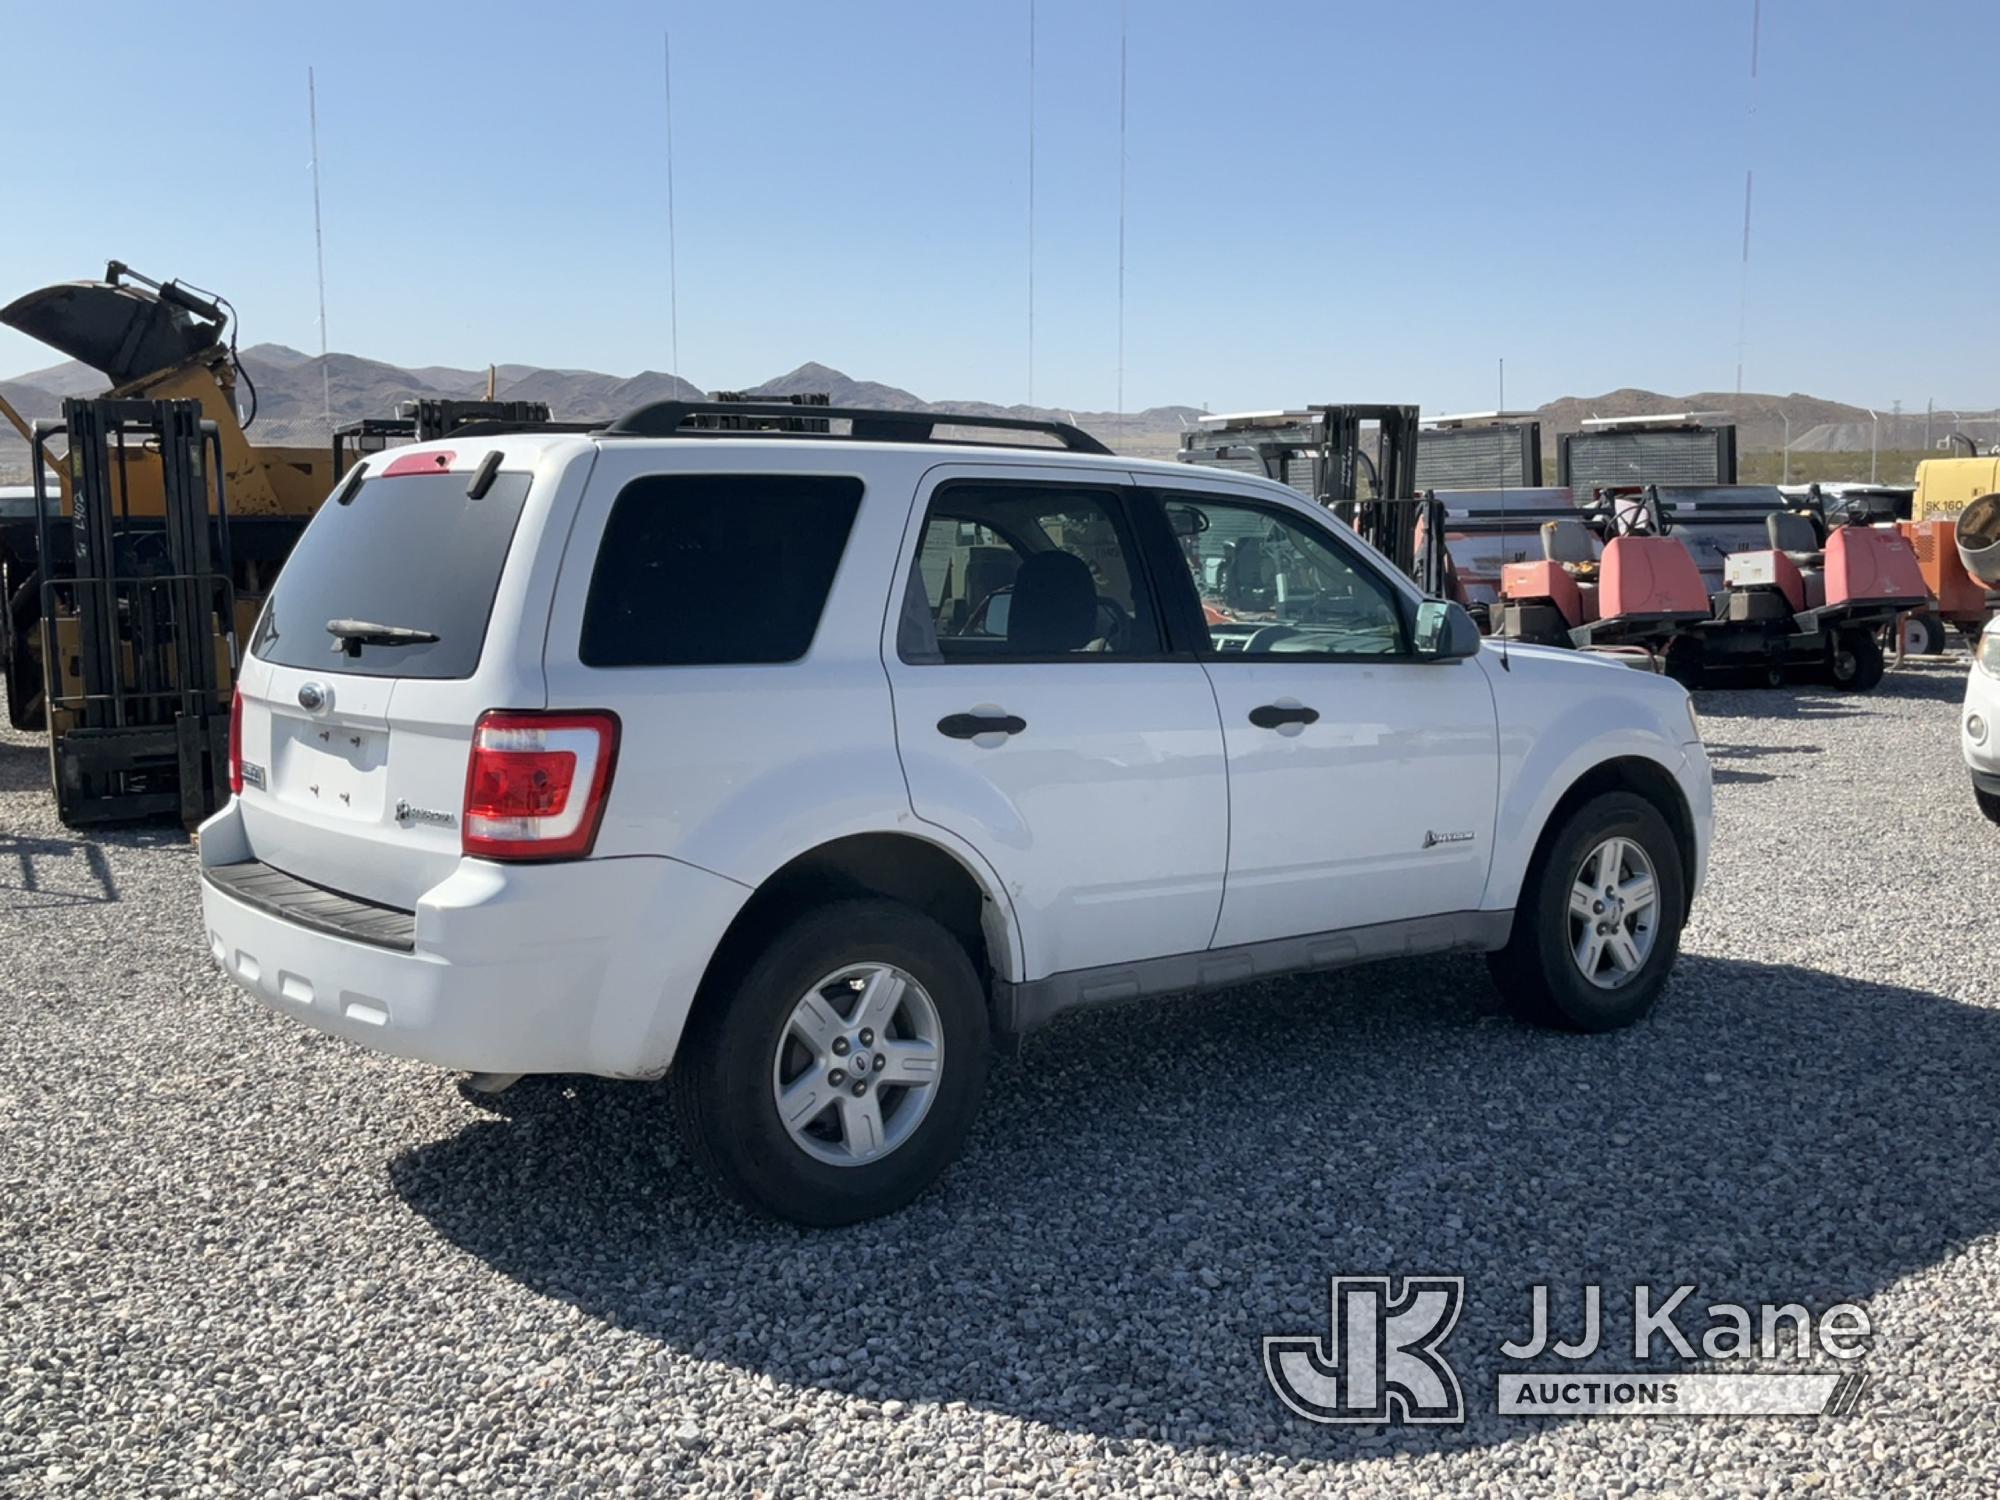 (Las Vegas, NV) 2009 Ford Escape Hybrid Towed In Bad Hybrid Battery, Will Not Start